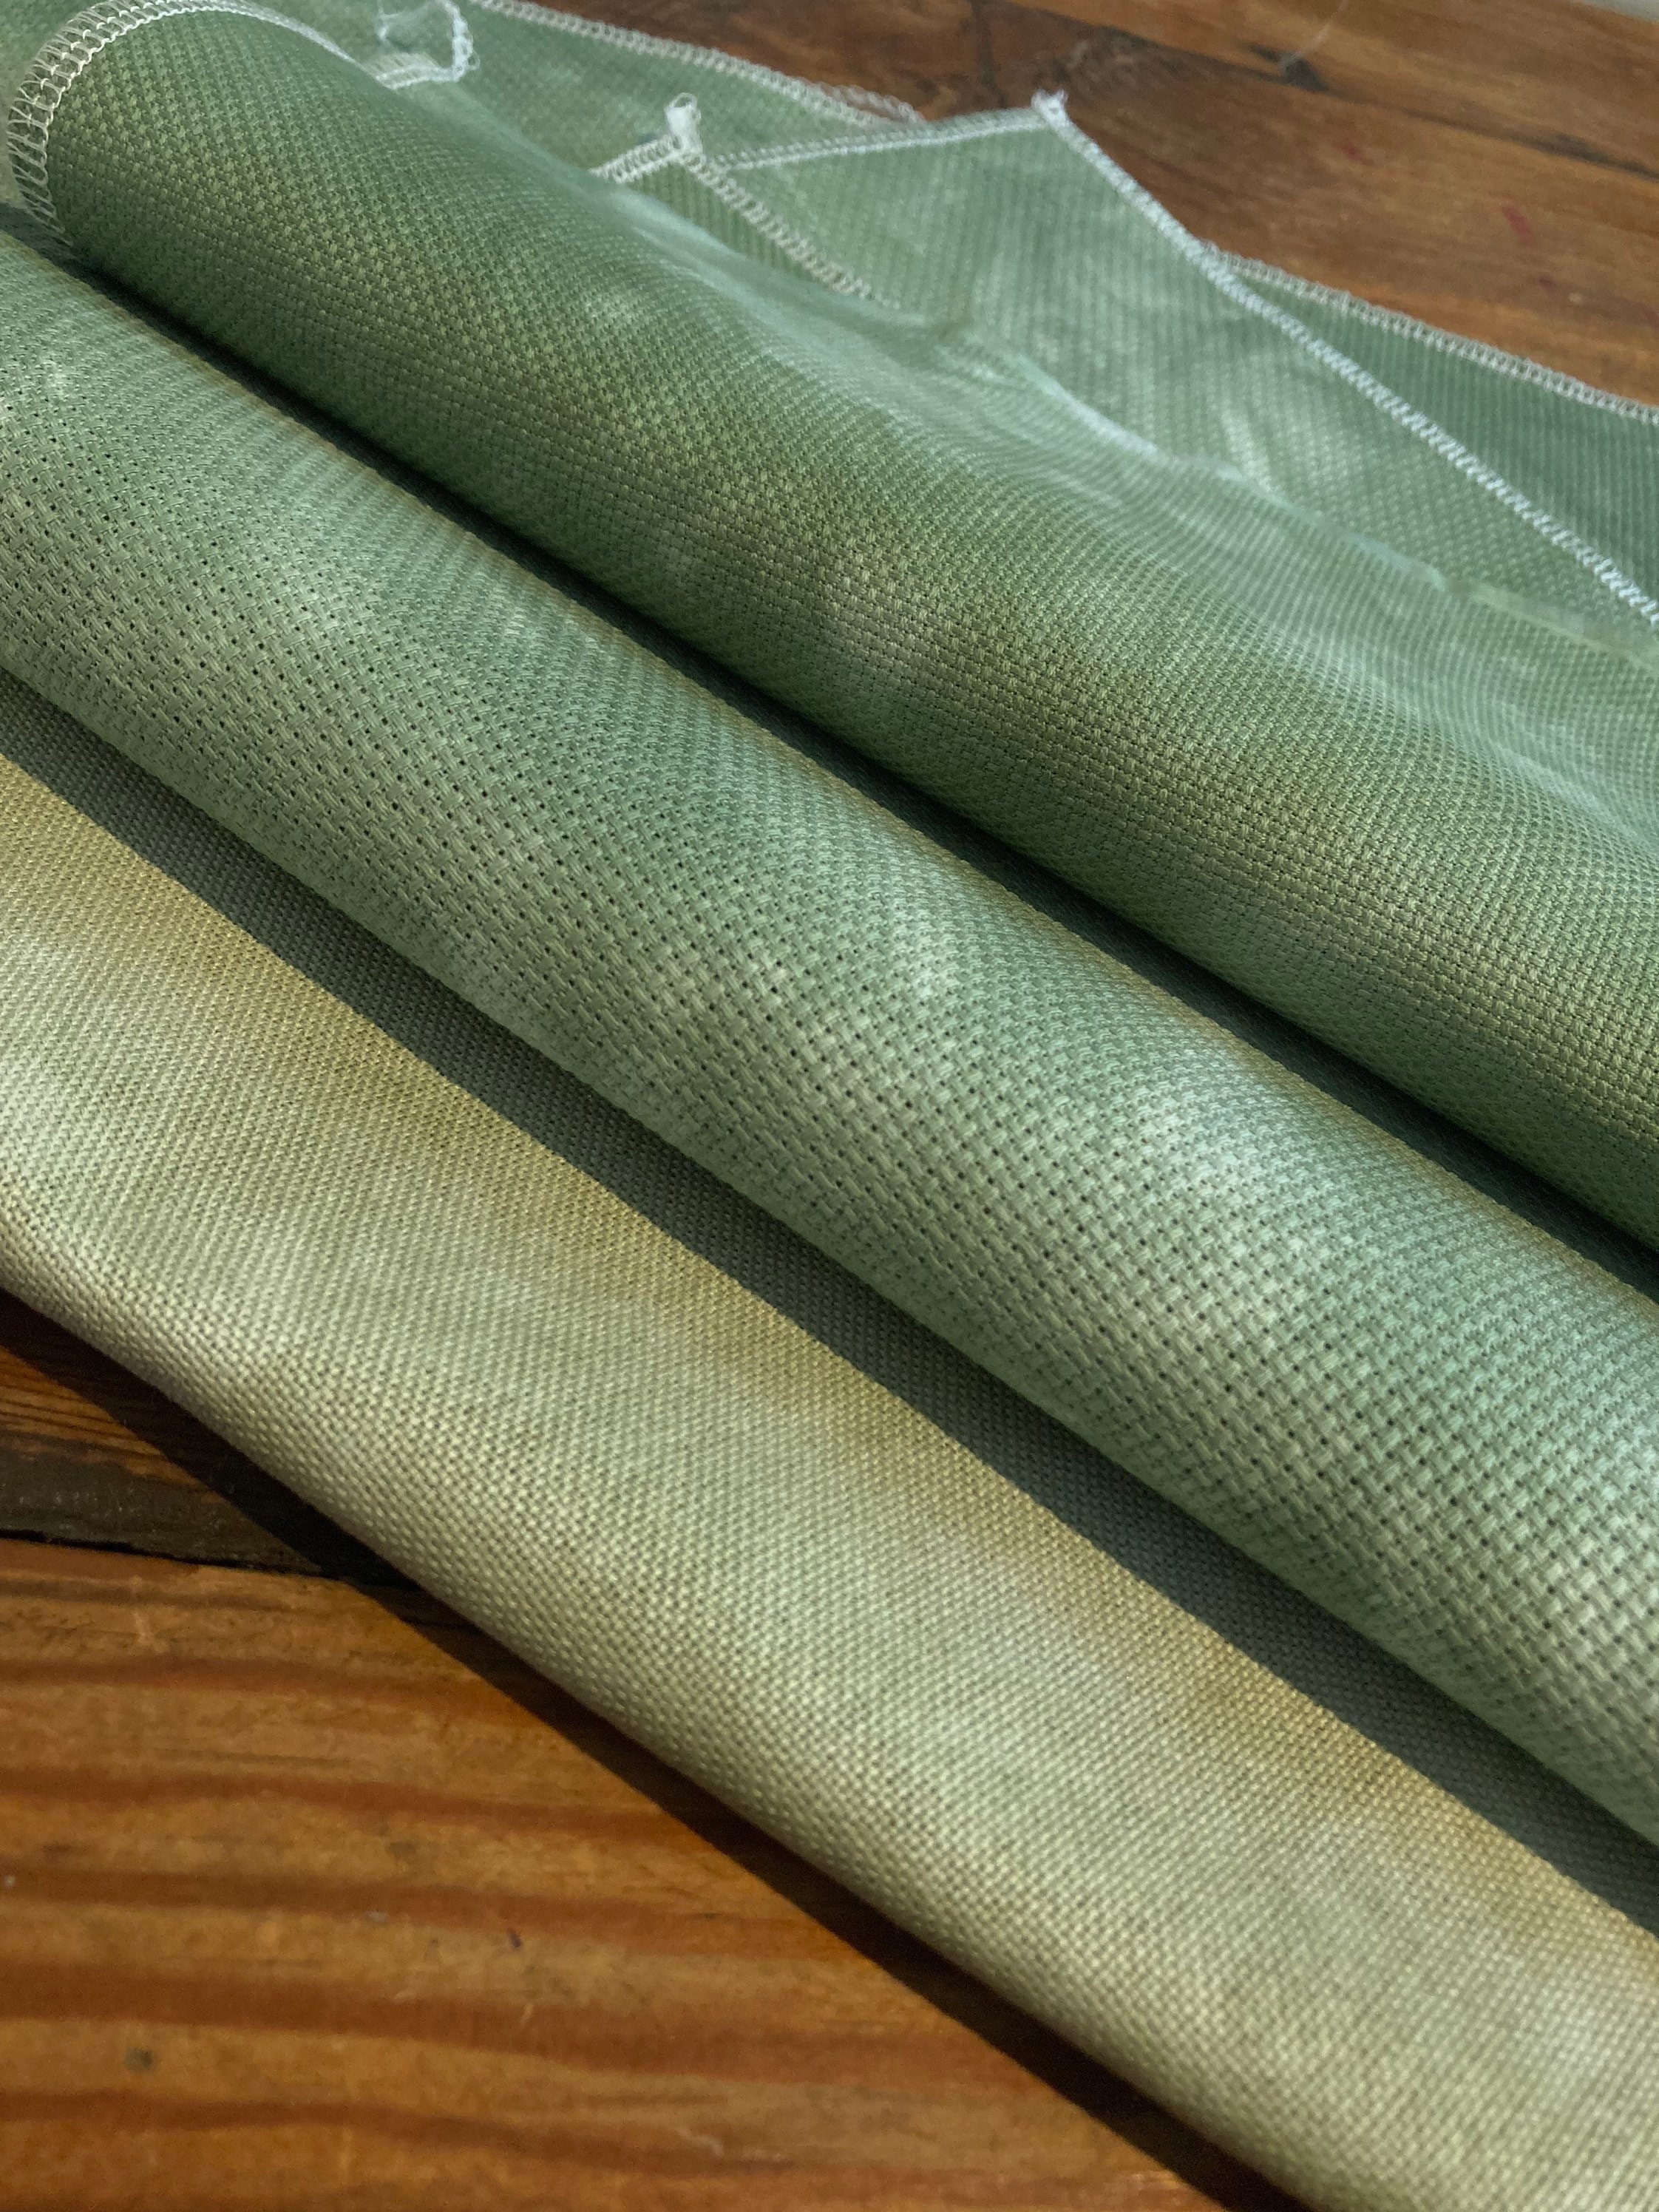 Green Aida Cloth, 14 and 16 Count, Hand Dyed, Cross Stitch Fabric,  Embroidery Fabric 